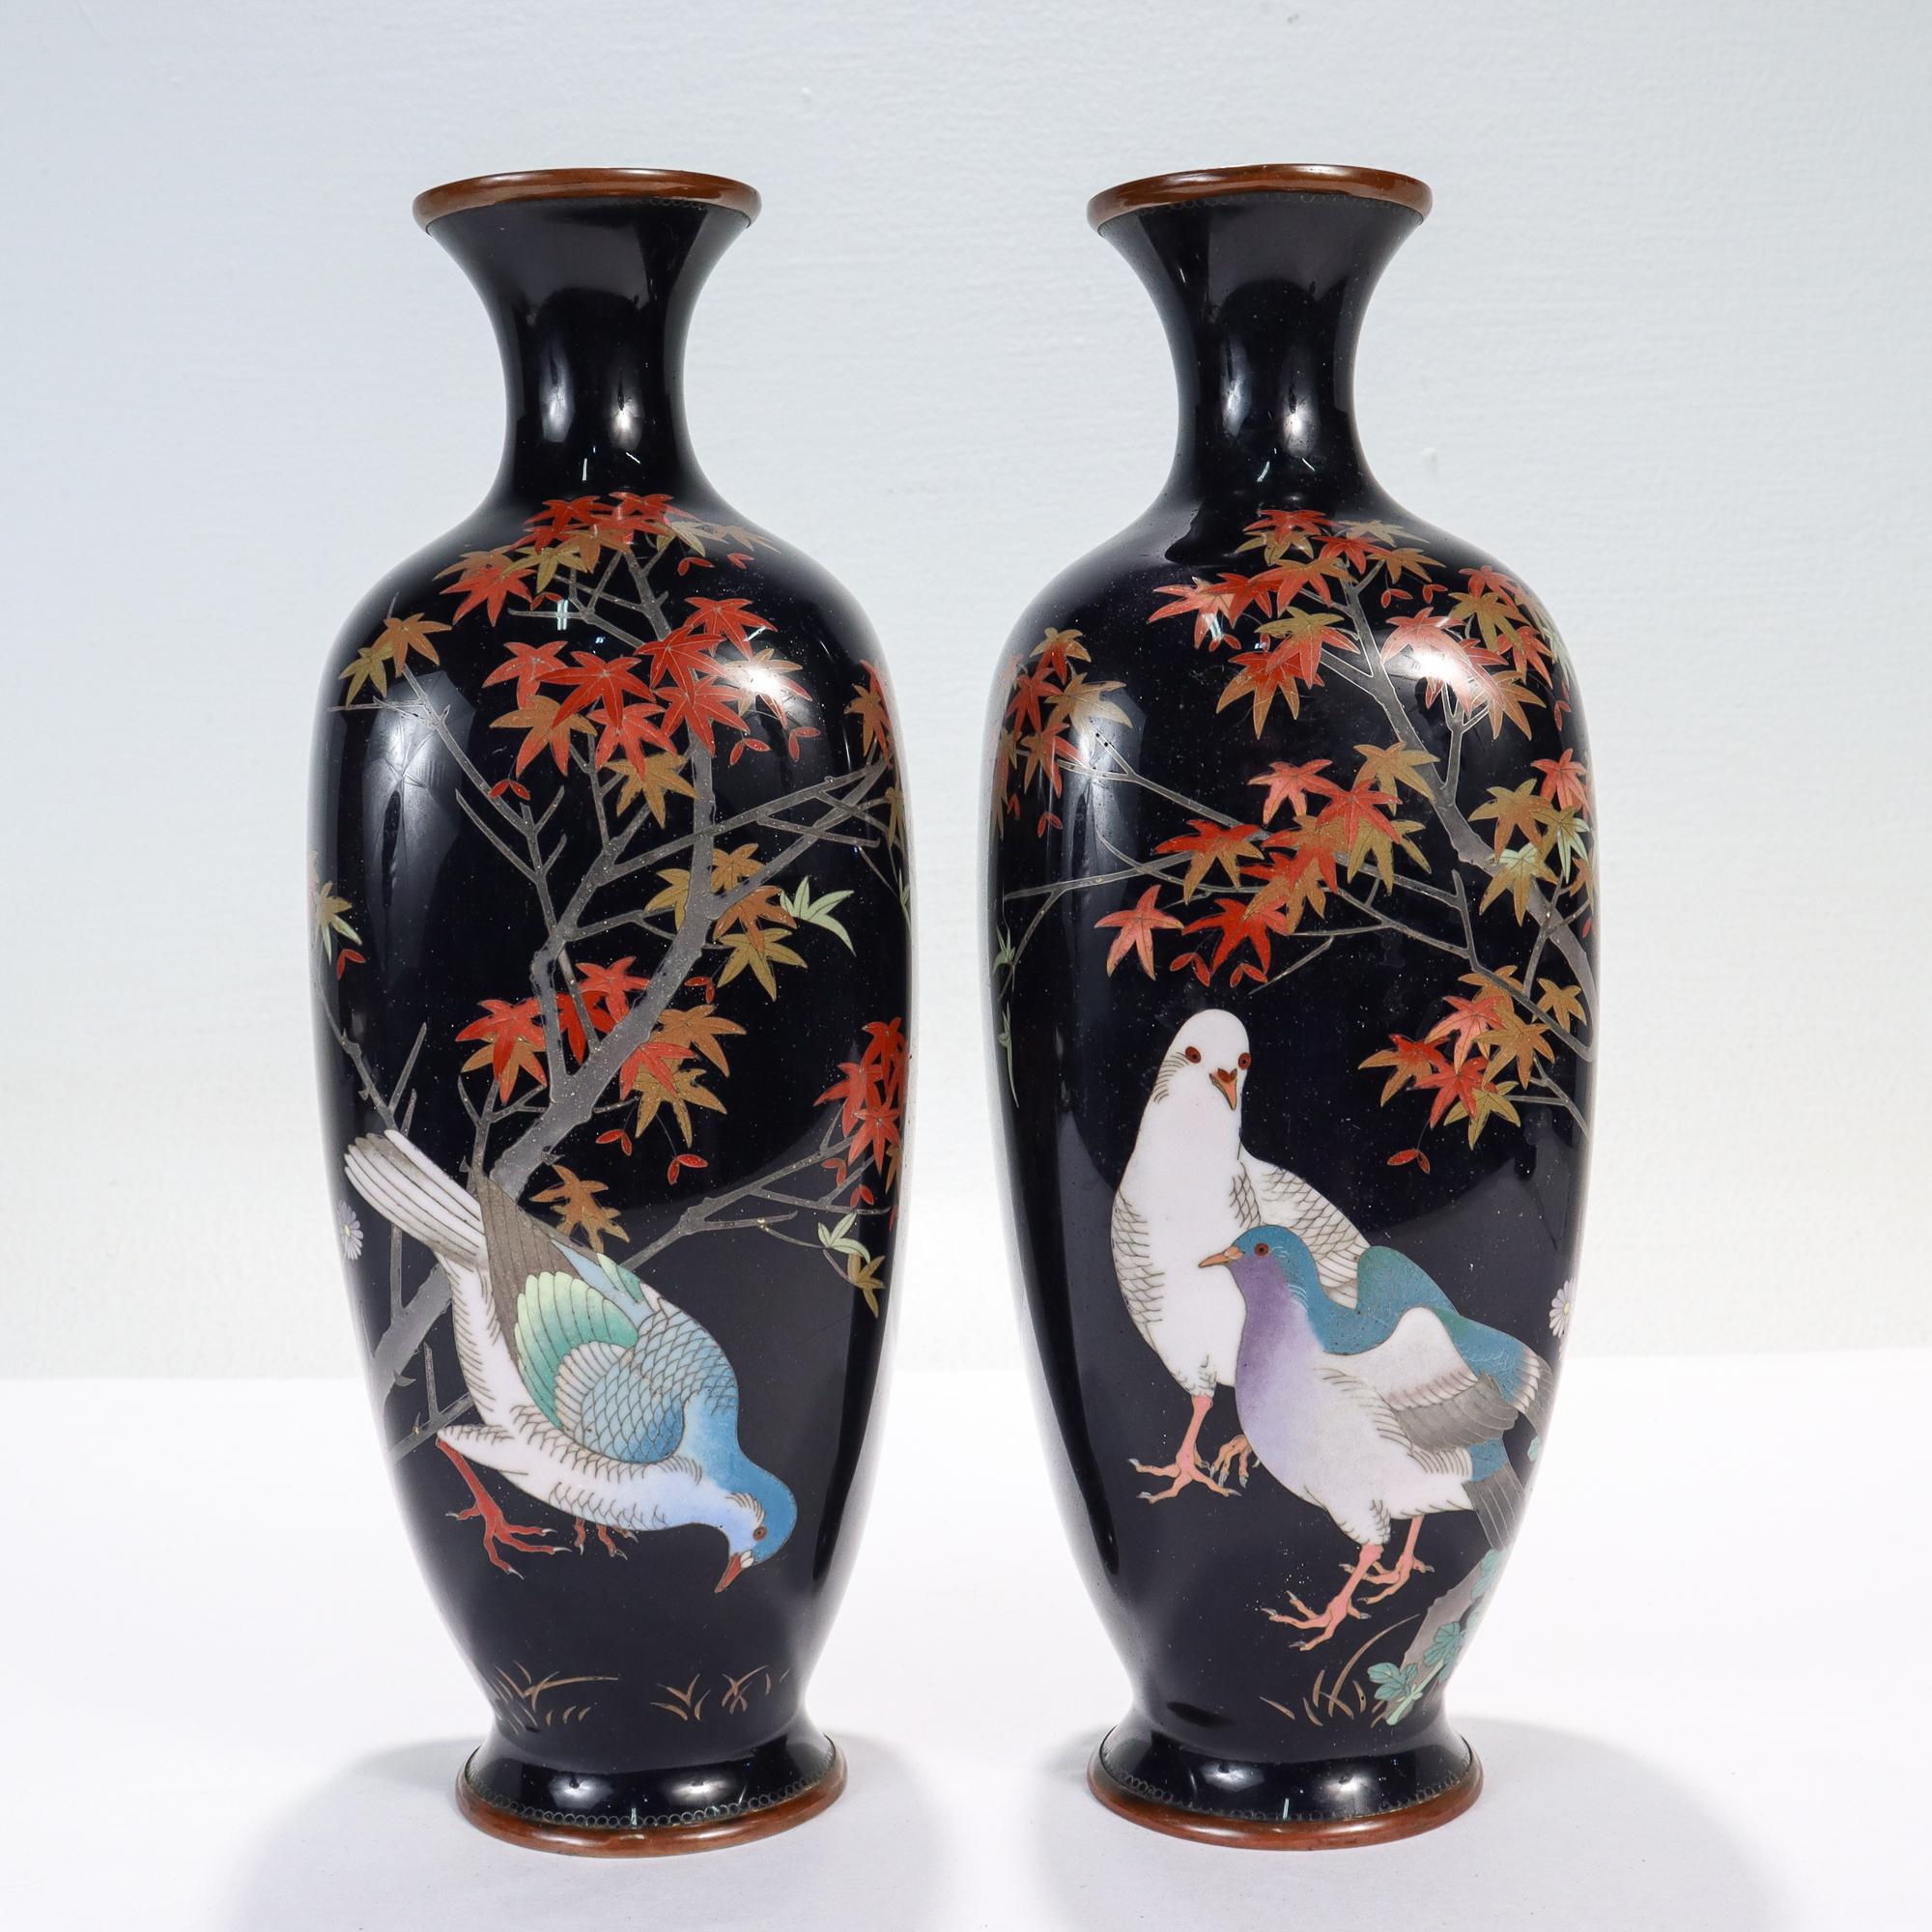 A fine pair of antique Japanese cloisonne vases.

By Gonda Hirosuke (1865 - 1937). Little is known about Hirosuke's life, but his work is highly prized and sought after collector's today.

Each vase has scenes of pigeons surrounded by patches of